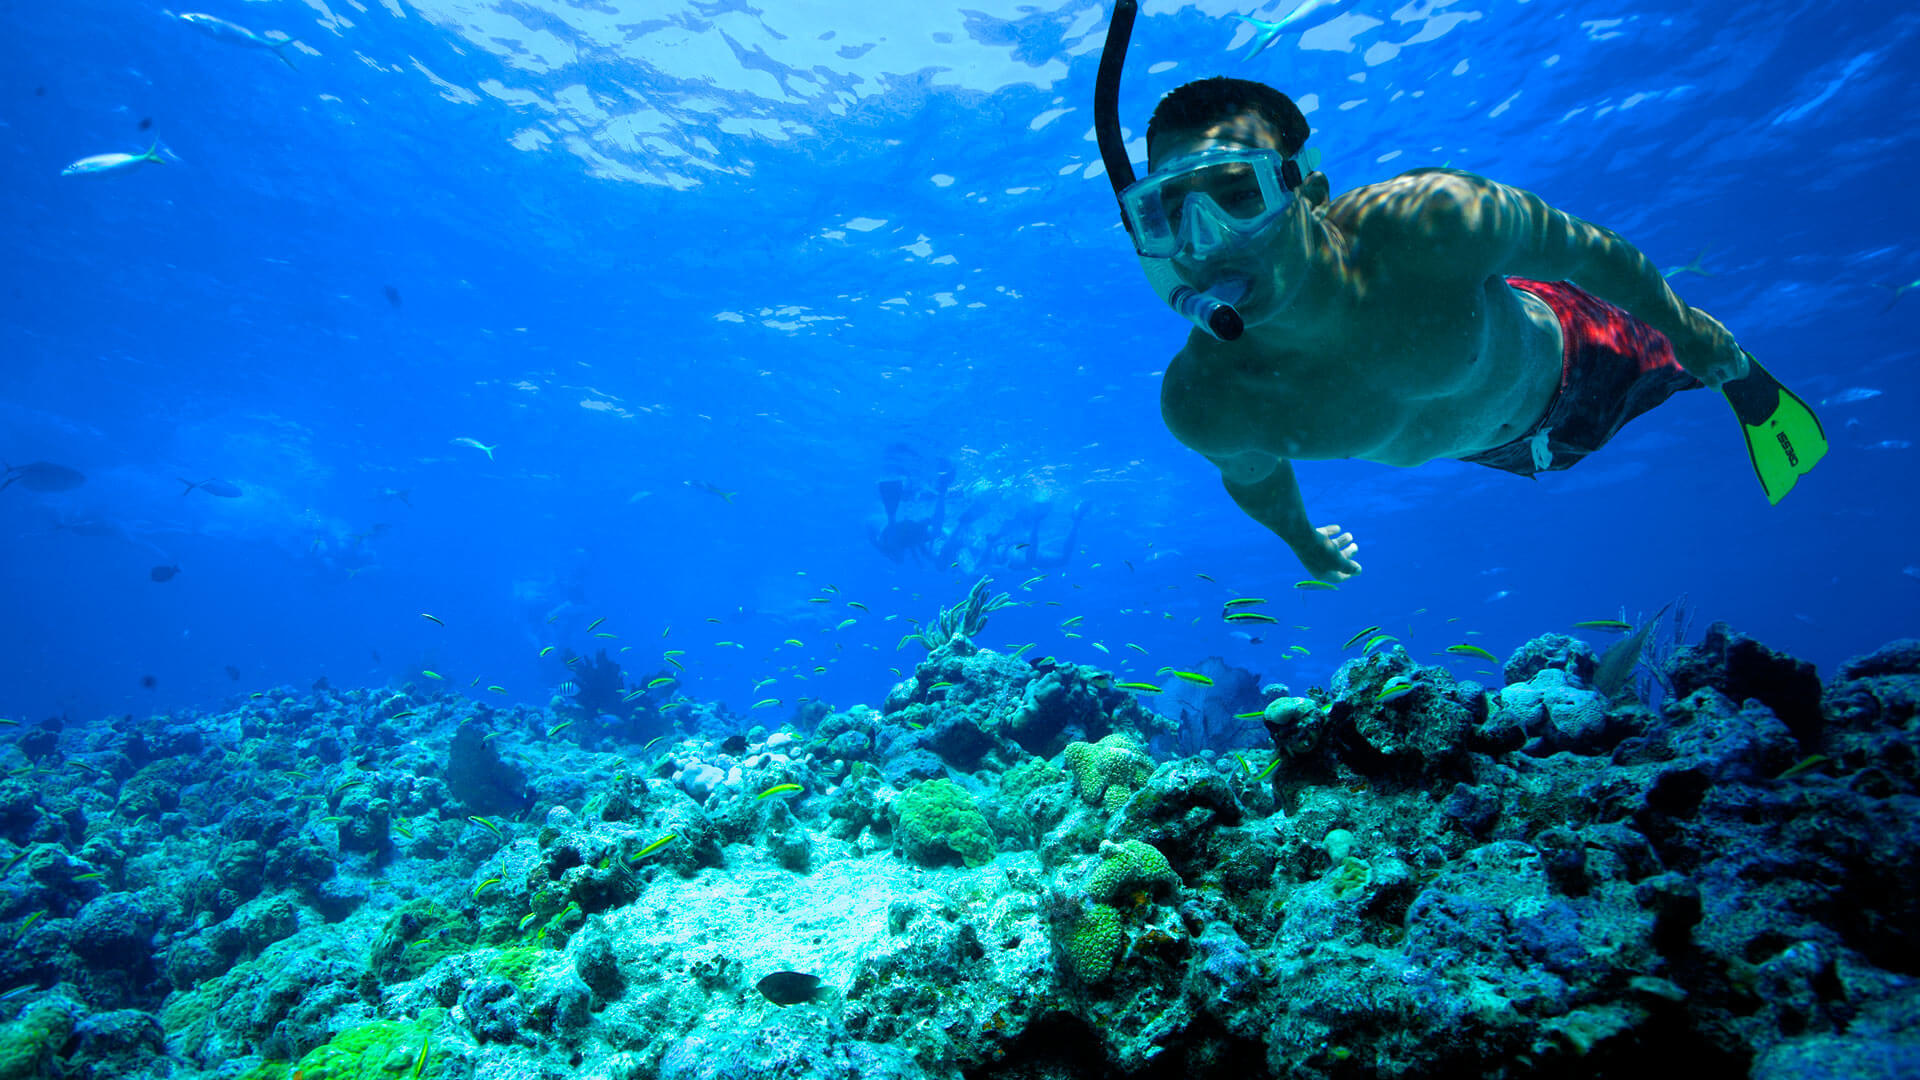 Snorkeling: Coral reef, Key West, Exploring the beautiful underwater world, Divemaster. 1920x1080 Full HD Background.